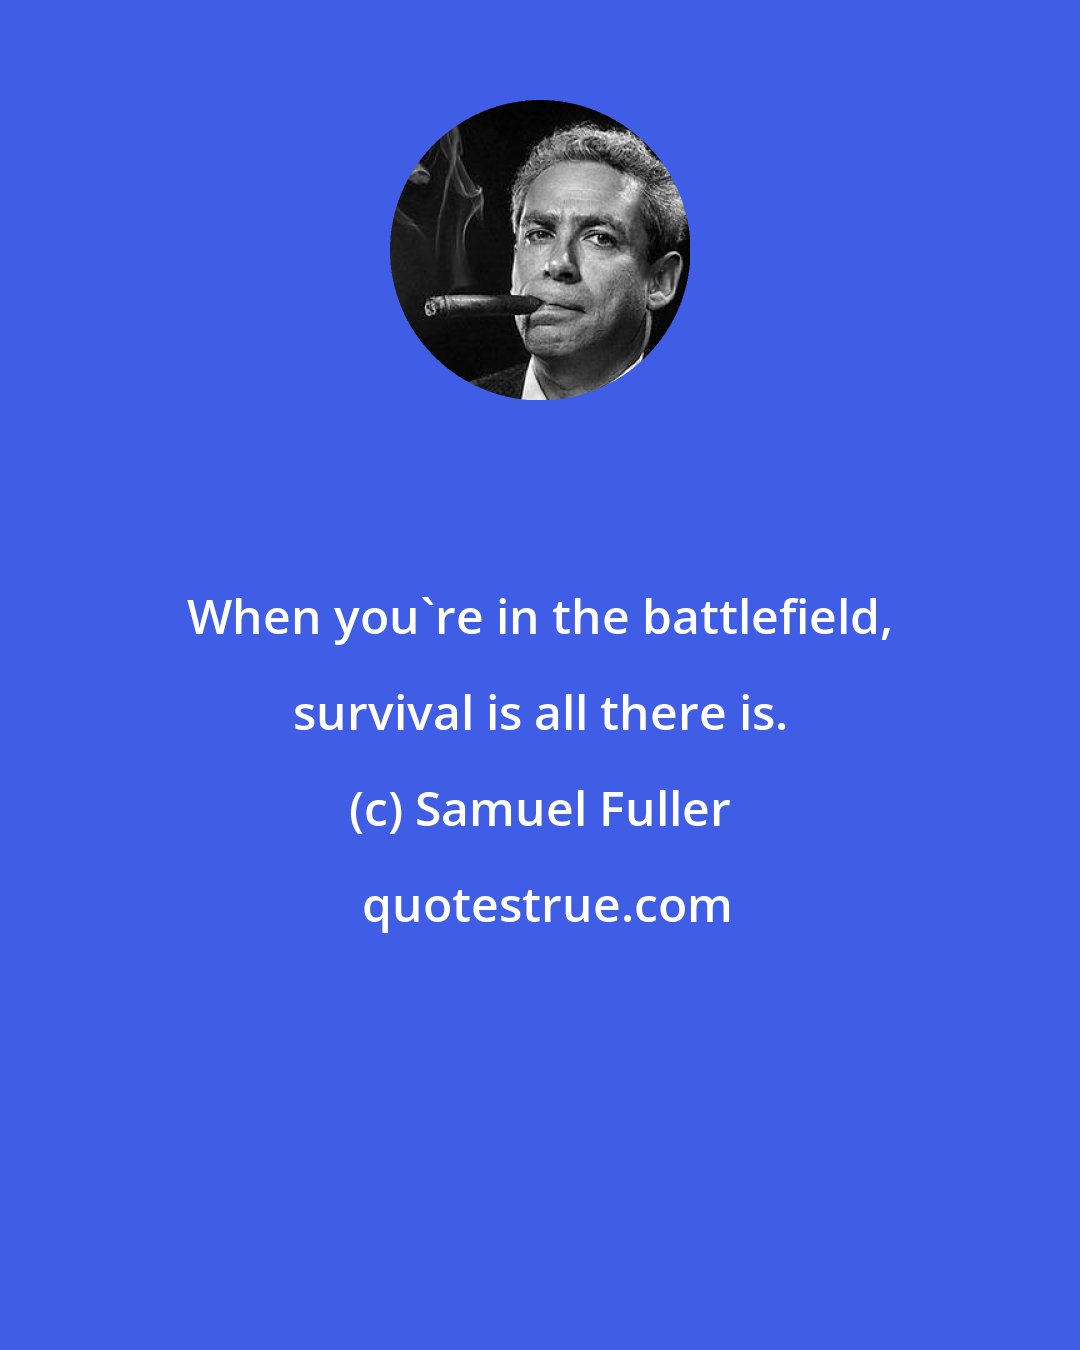 Samuel Fuller: When you're in the battlefield, survival is all there is.